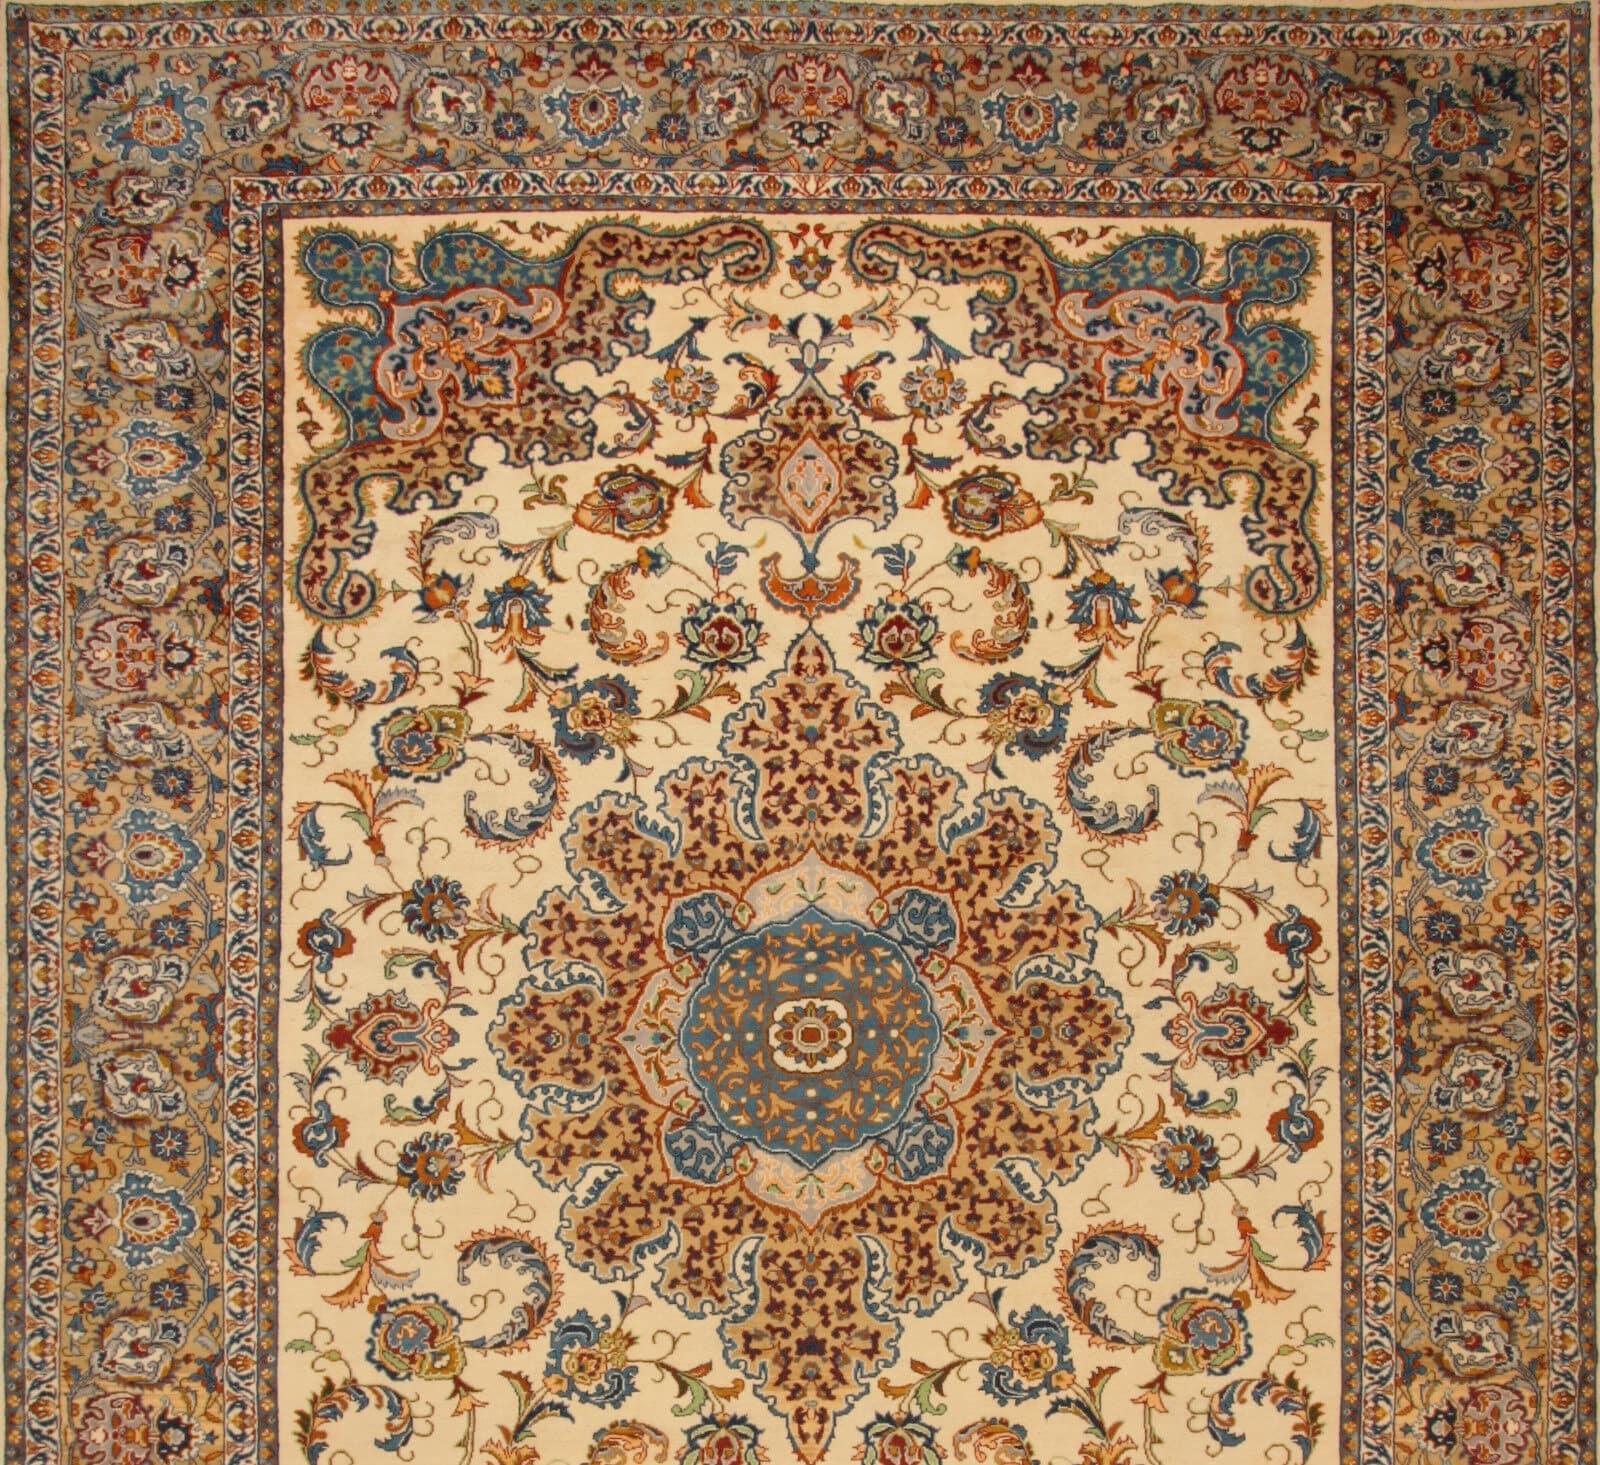 Handmade Vintage Persian Style Isfahan Rug 9.9' x 13.7', 1990s - 1T45 For Sale 4